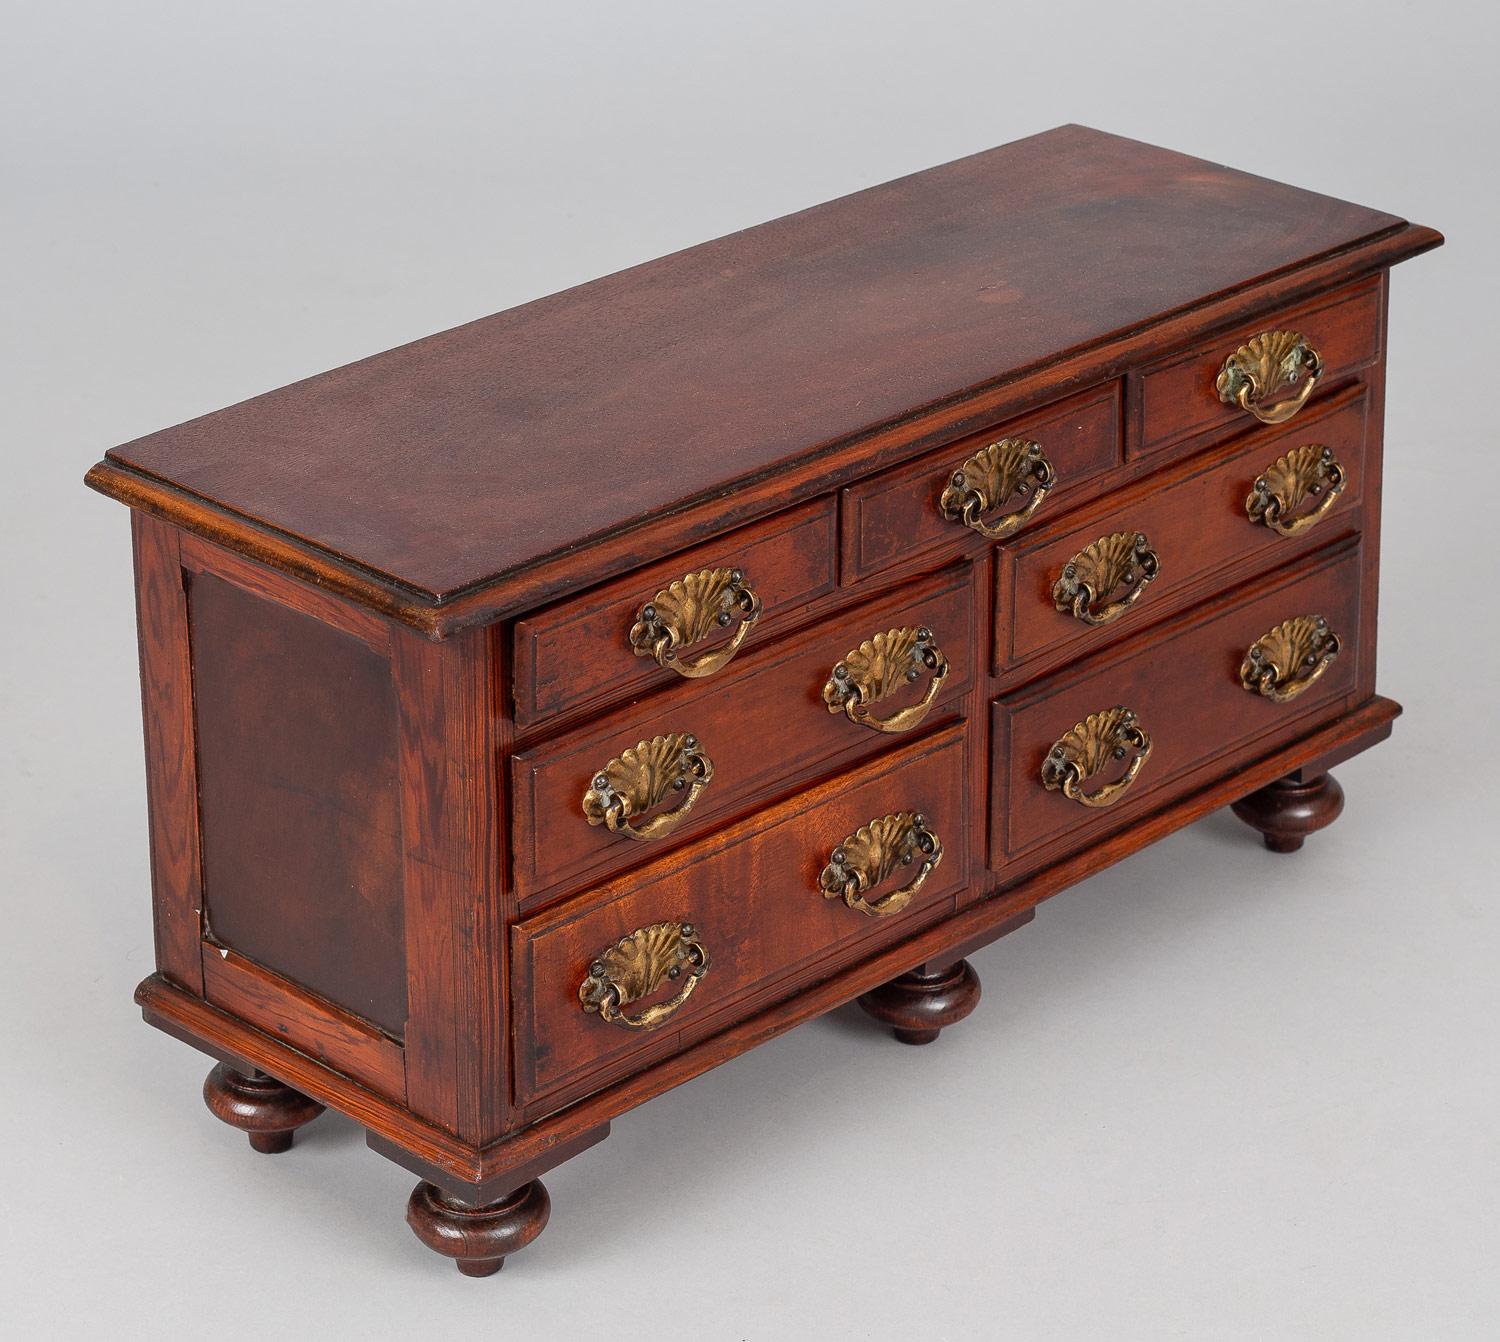 Miniature mahogany chest of drawers with two short drawers over two rows of two drawers each, brass shell-shaped back plates with bail handles, raise on turnip shaped feet.